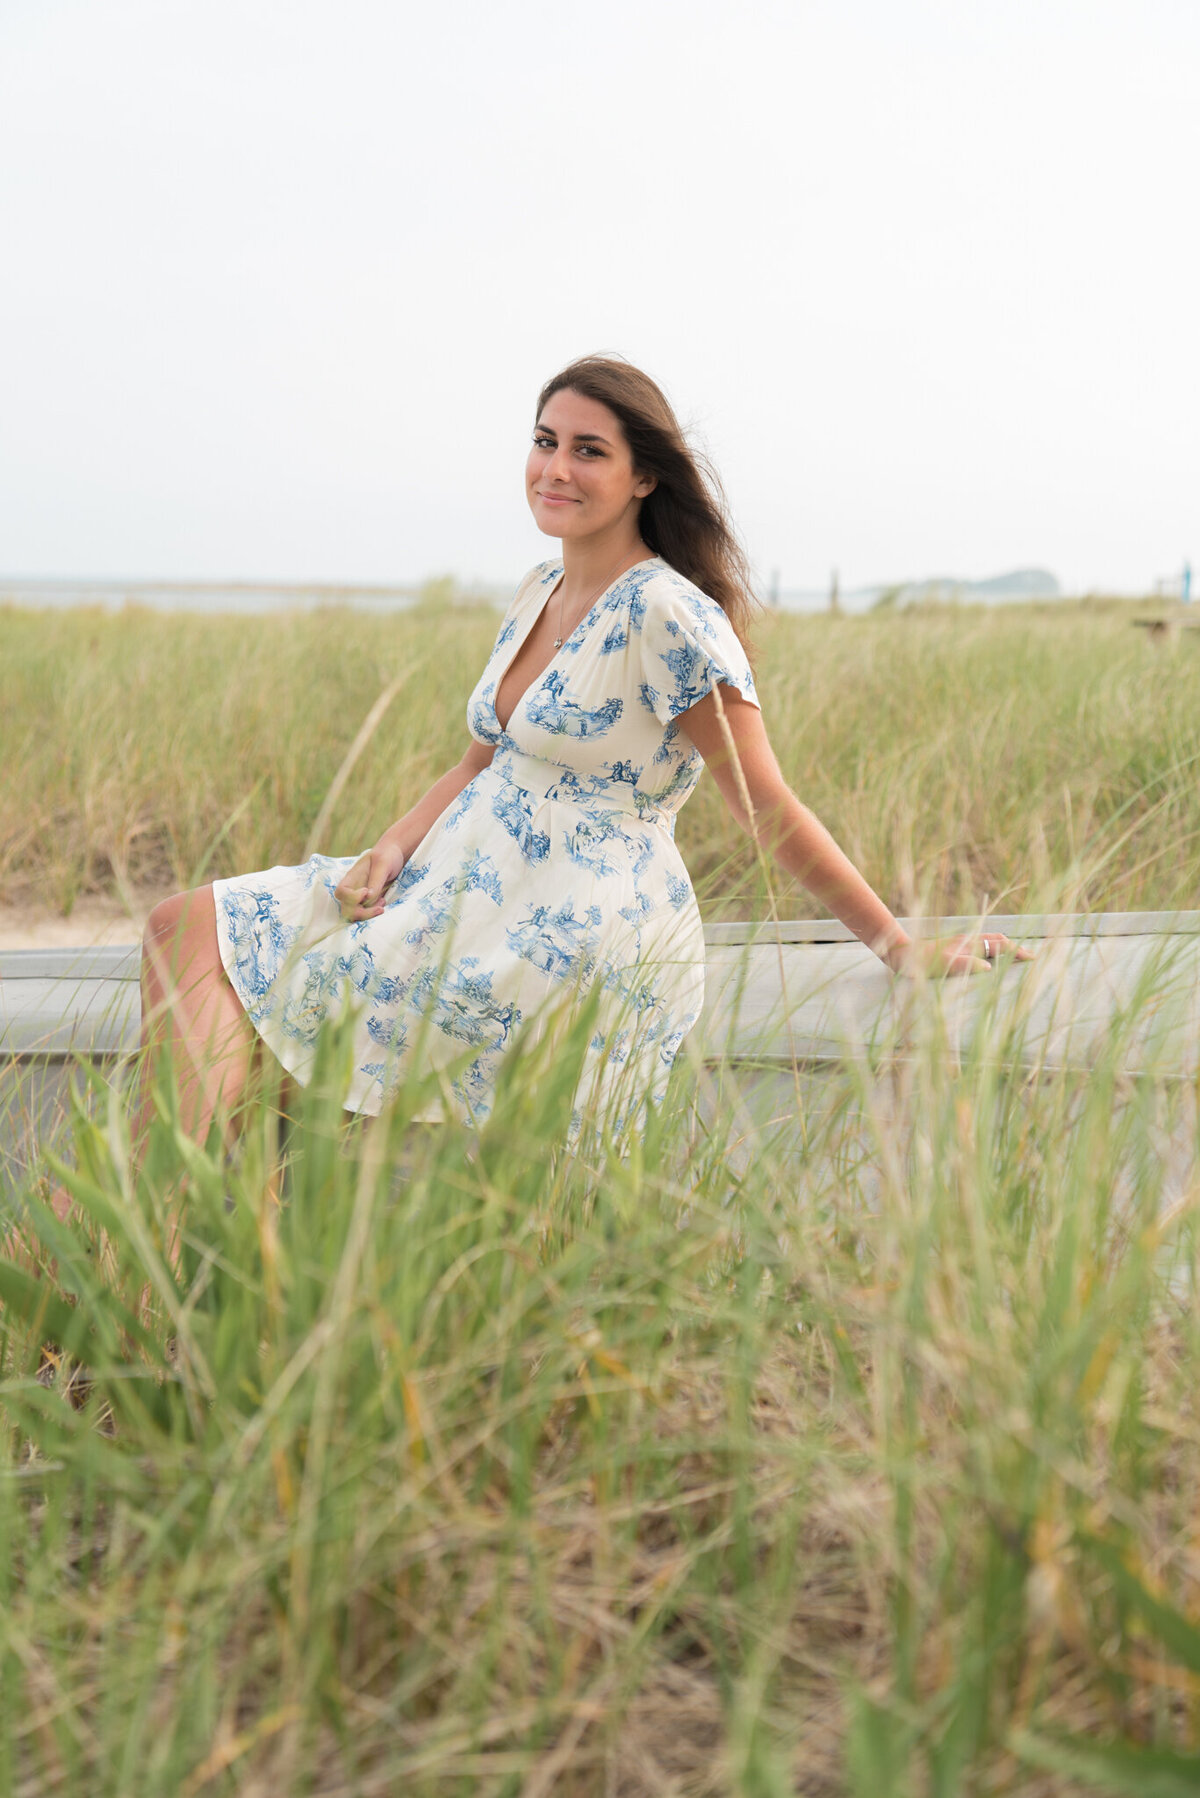 Teen girl sitting on a piece of driftwood in dune grass with white dress, blue flowers.